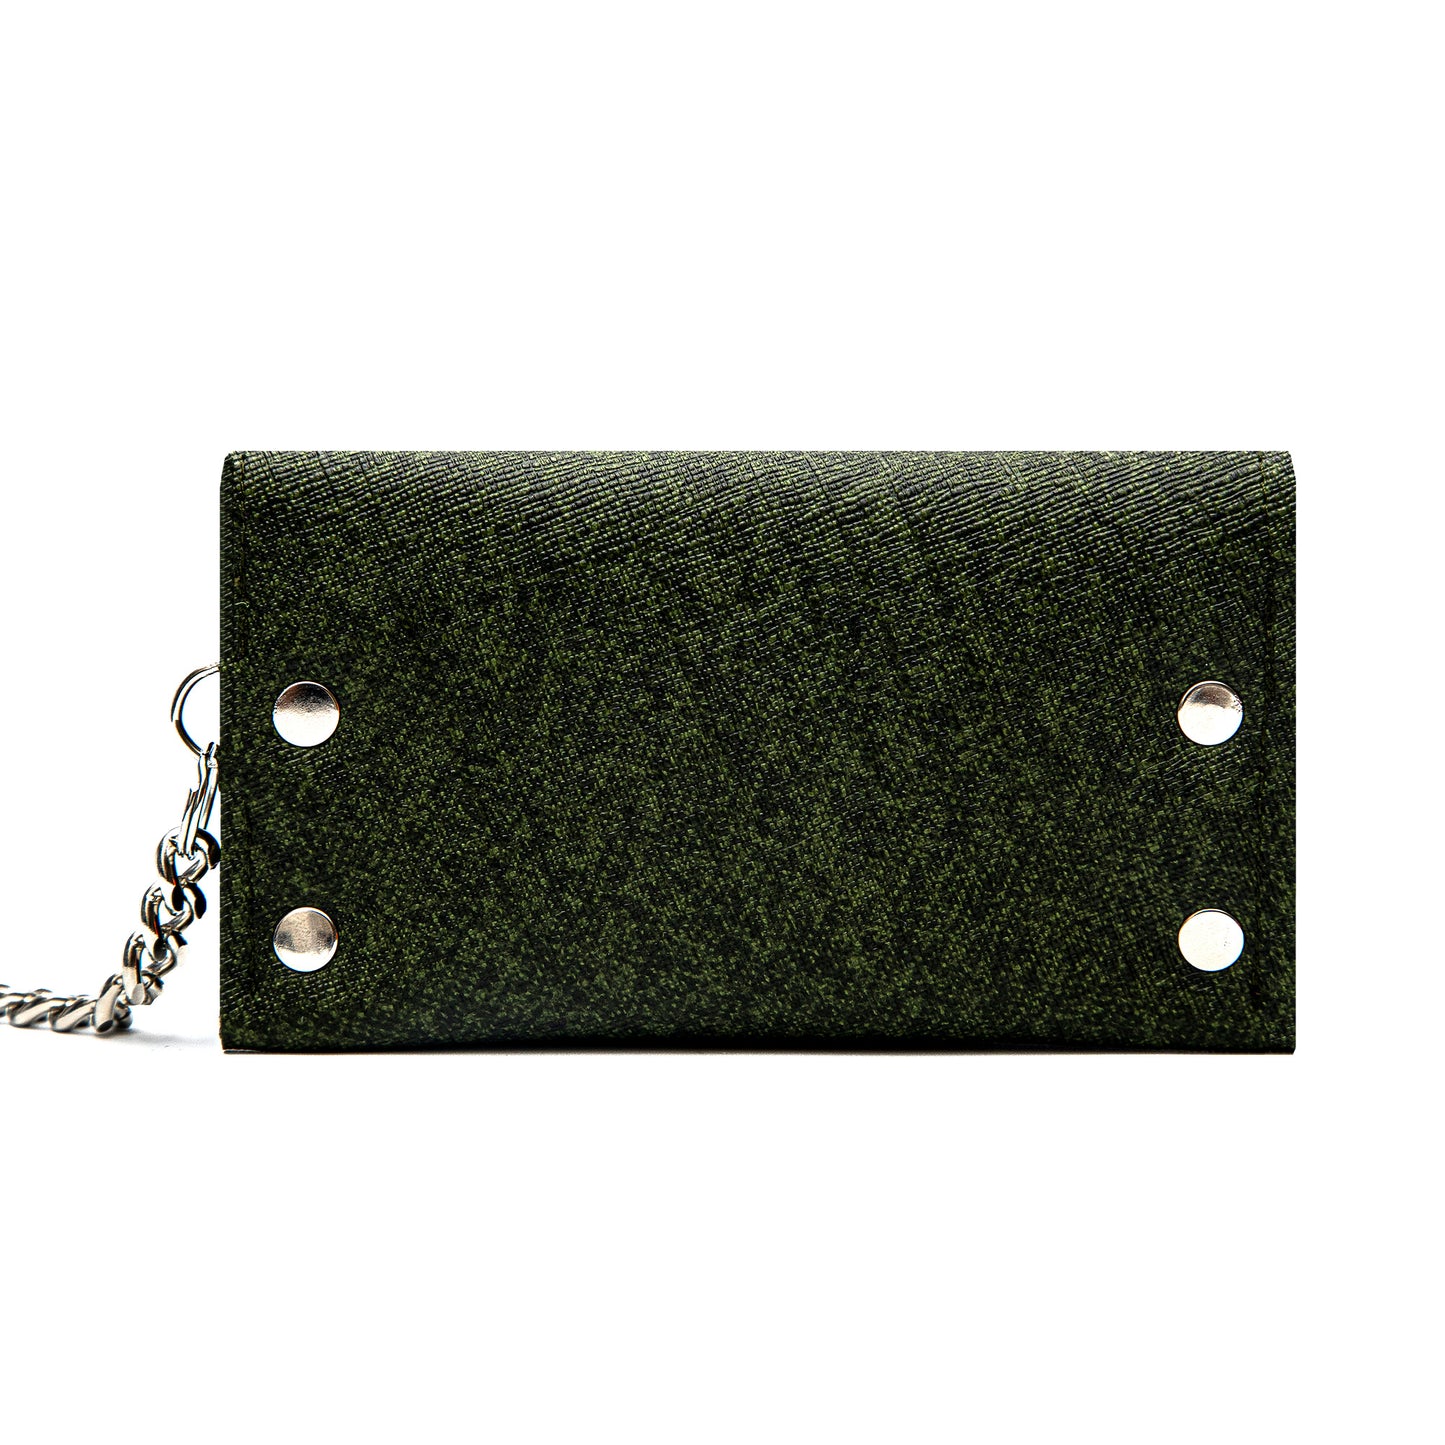 Handcrafted Biker Wallet with Detachable Chain - Cruelty-Free and Fashionably Functional - Olive Green Faux Leather